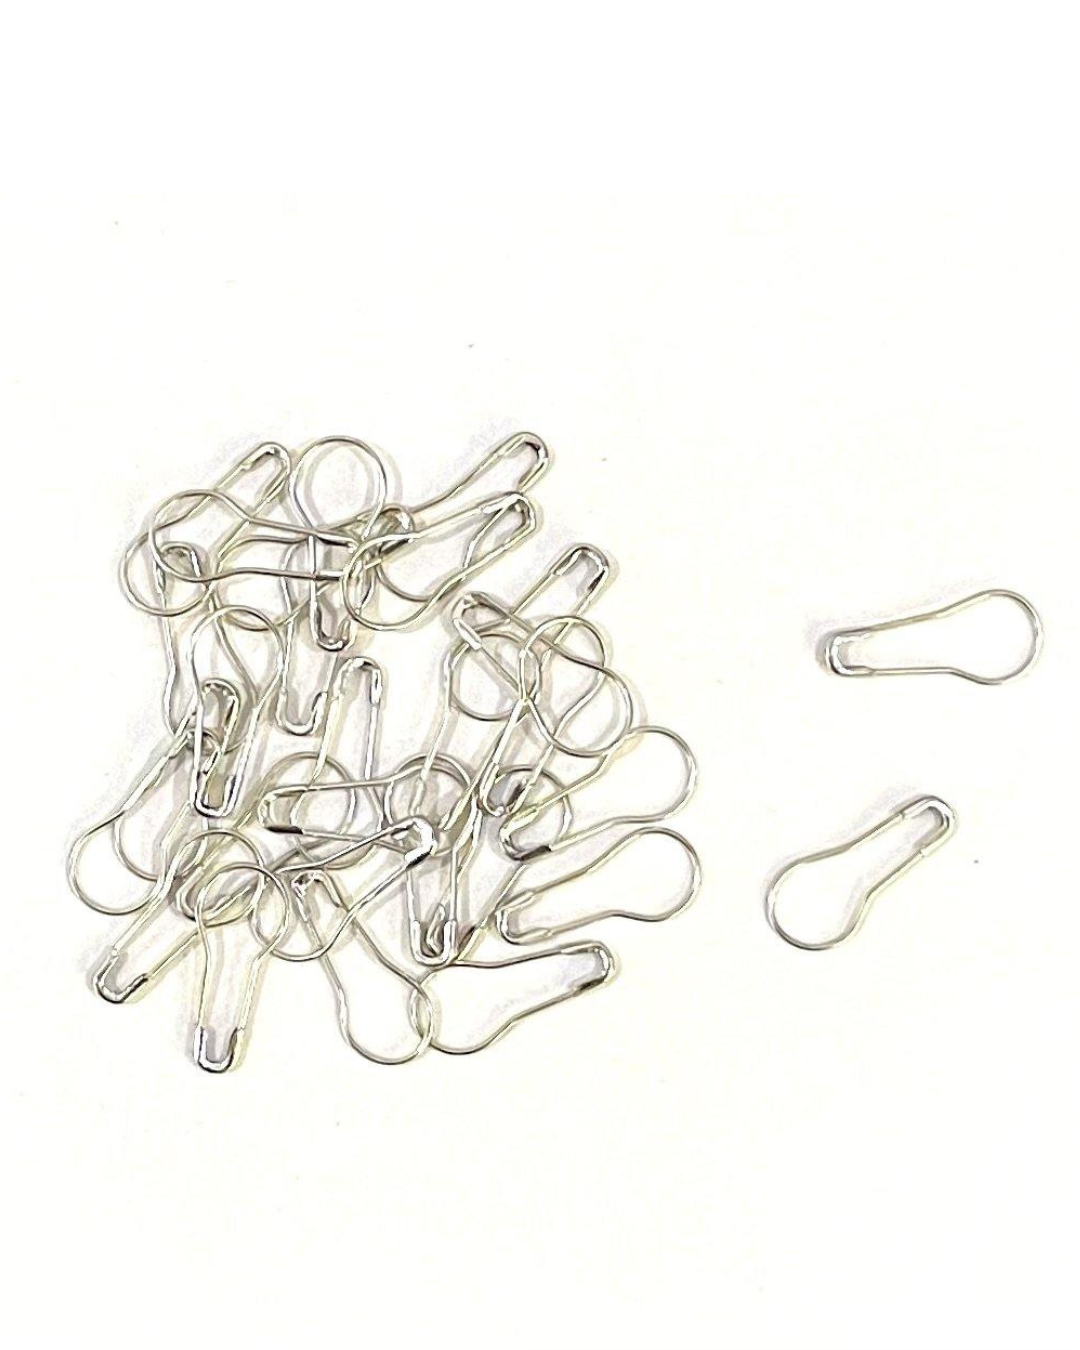 Coil Less Hijab Safety Pins - Silver (50 pcs) - Kef